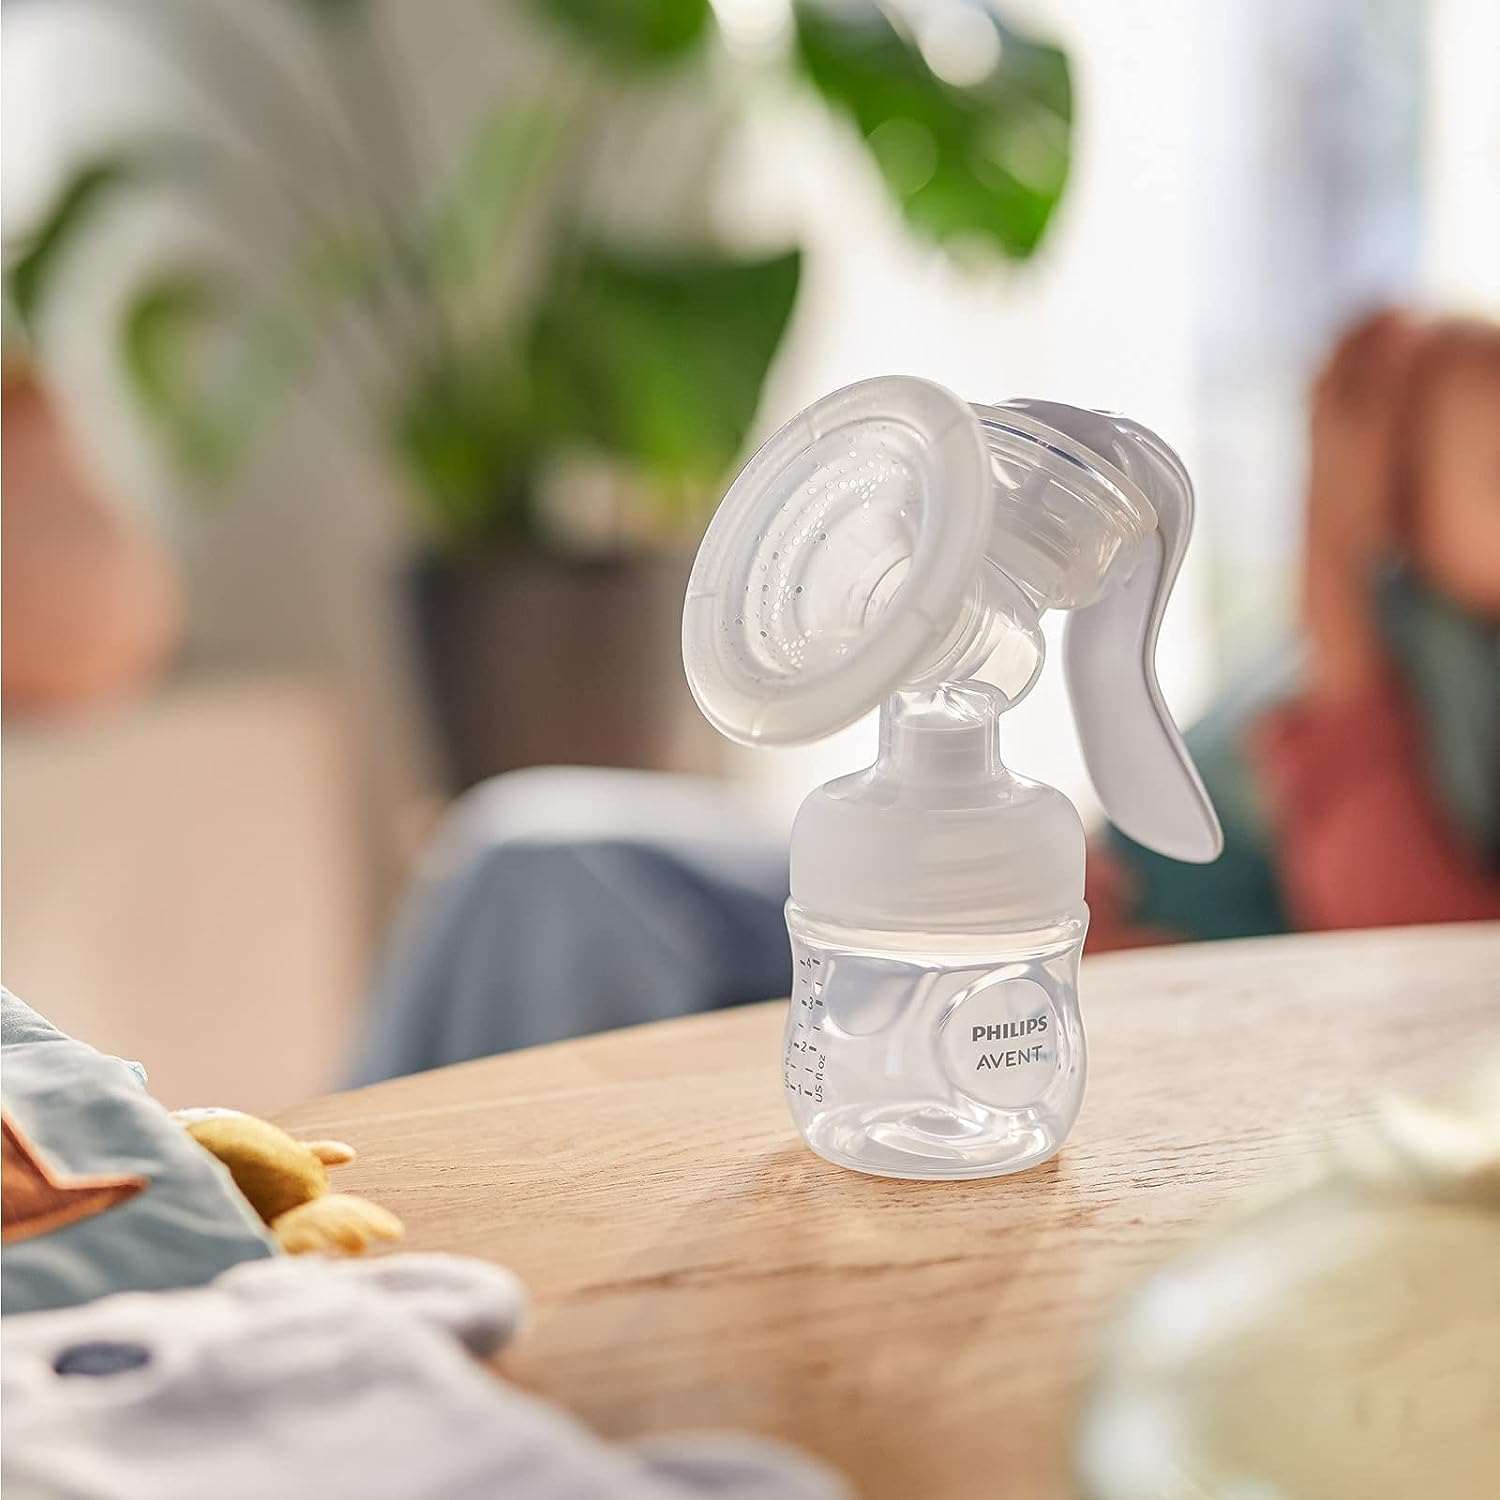 Philips Avent manual breast pump - easy pumping, with Natural Motion technology, BPA-free (model SCF430/01)